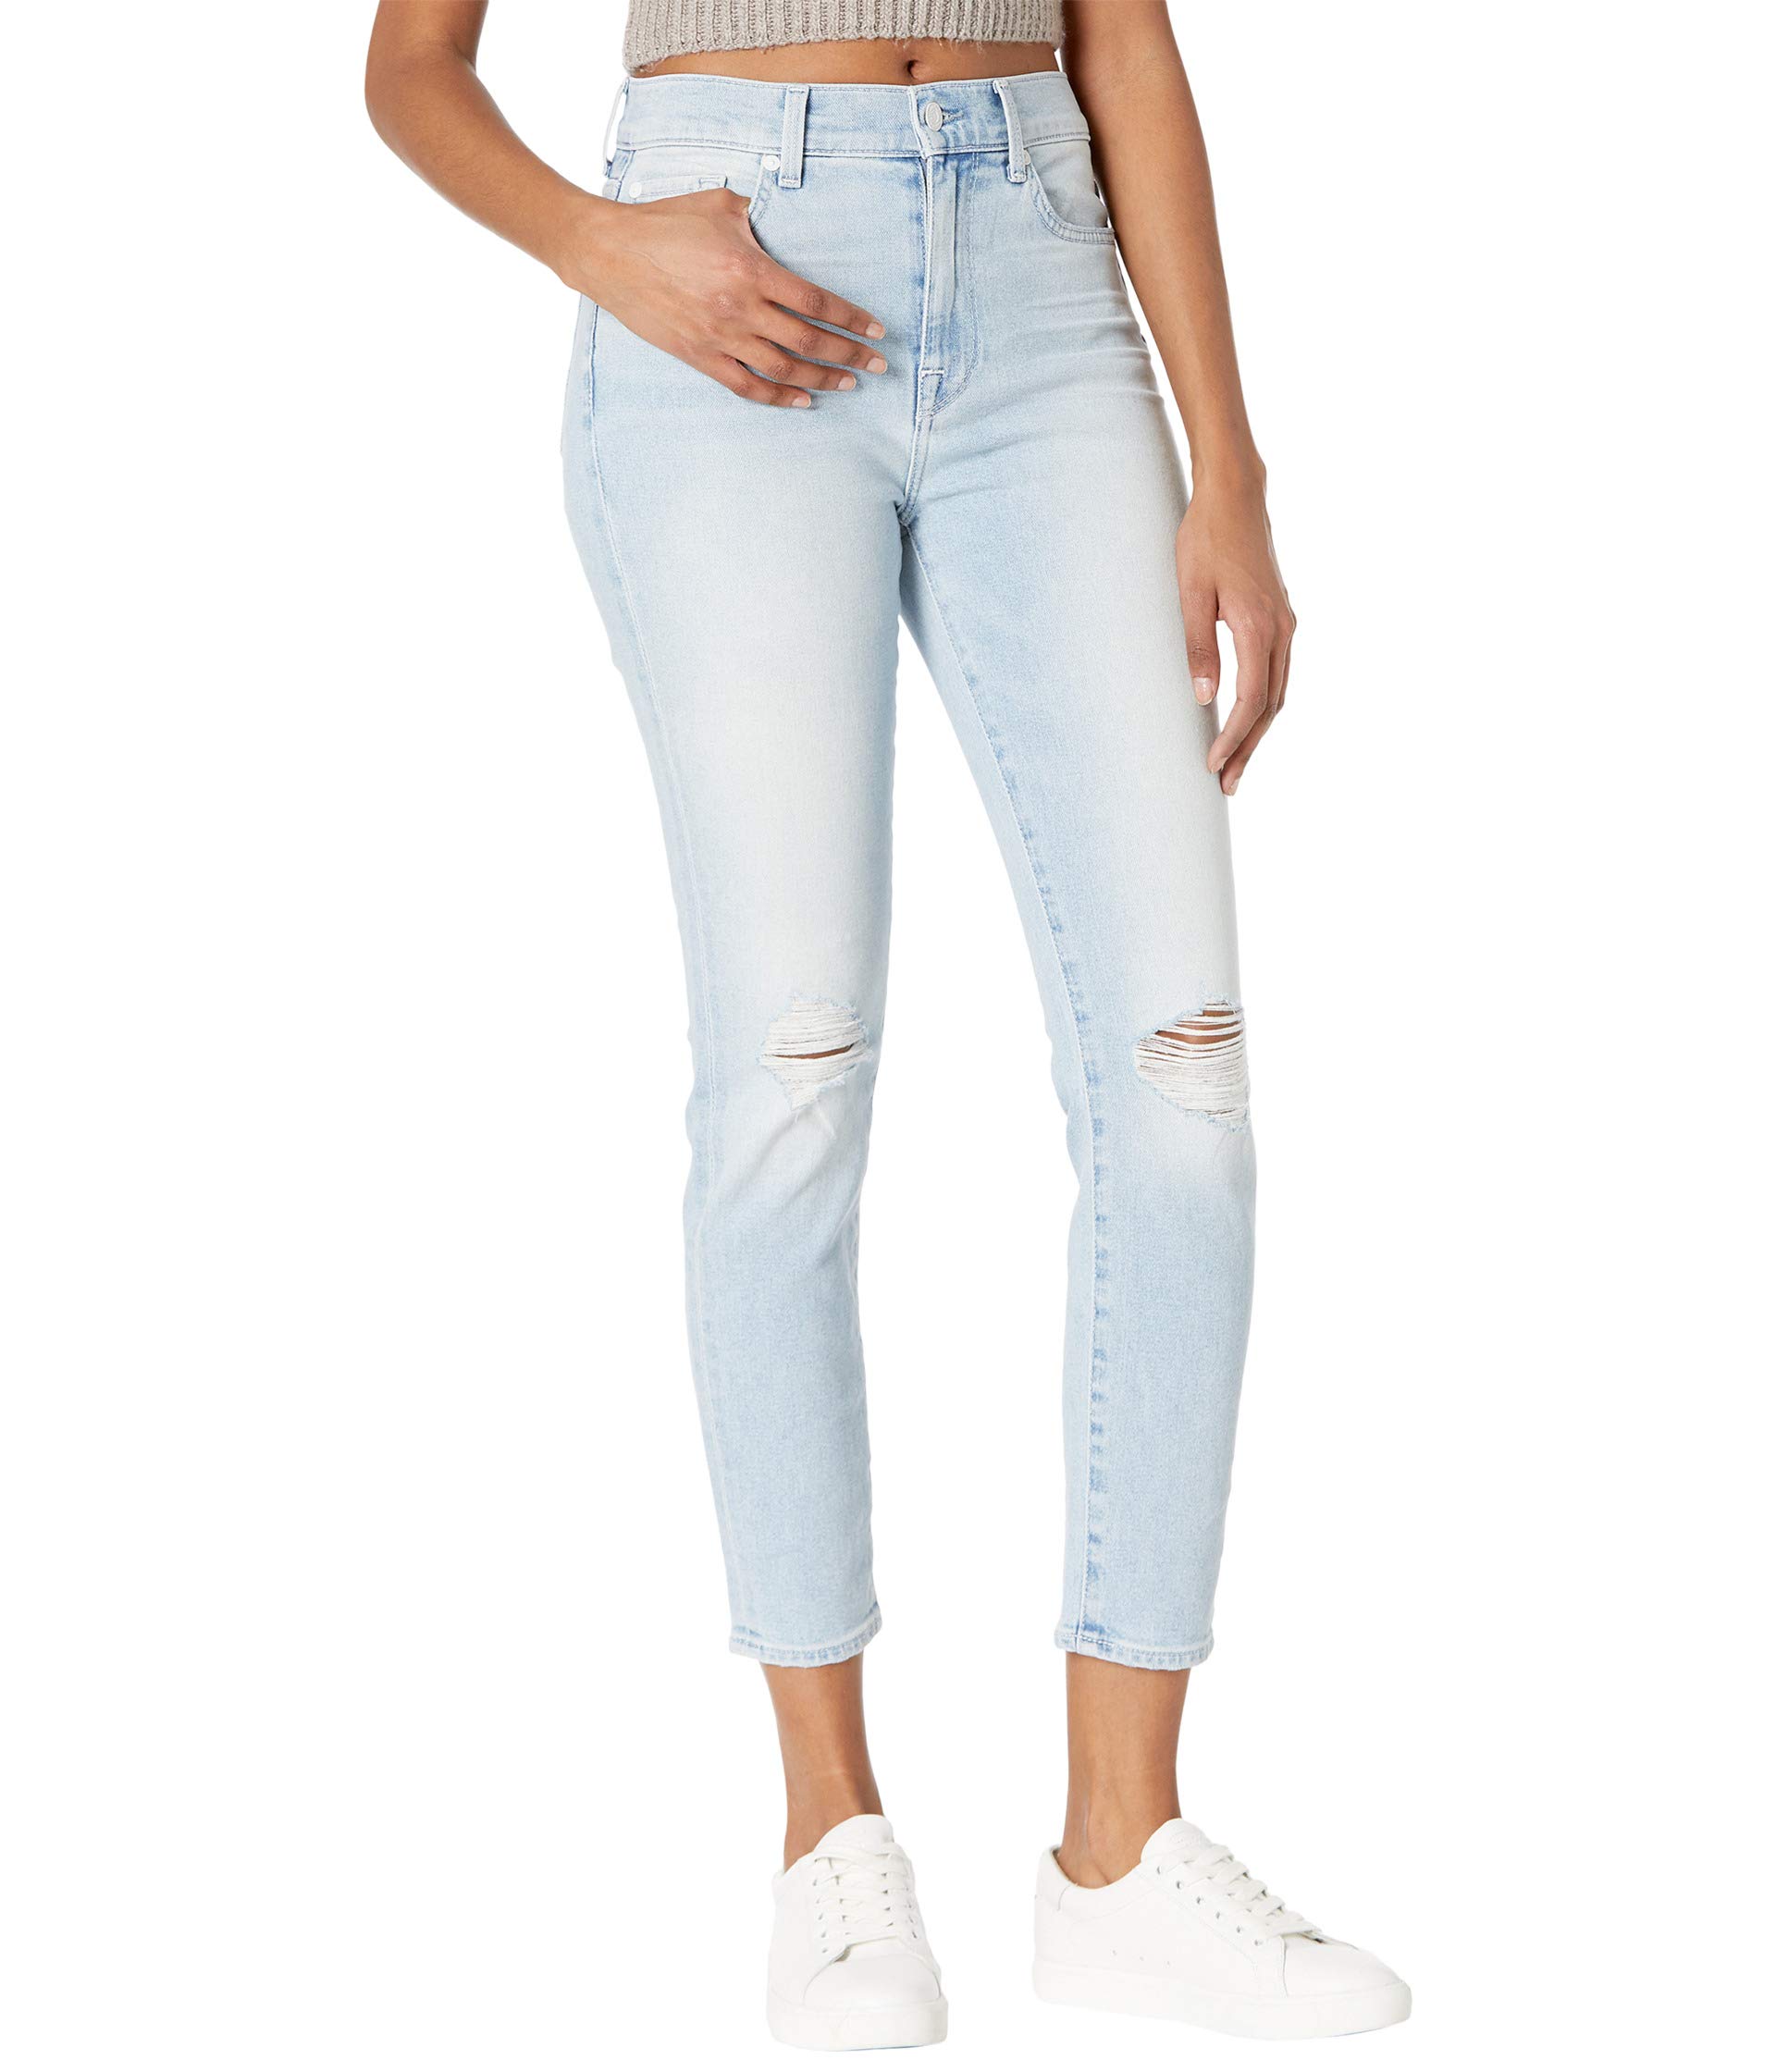 Джинсы 7 For All Mankind, The High-Waist Ankle Skinny in Beverly Boulevard